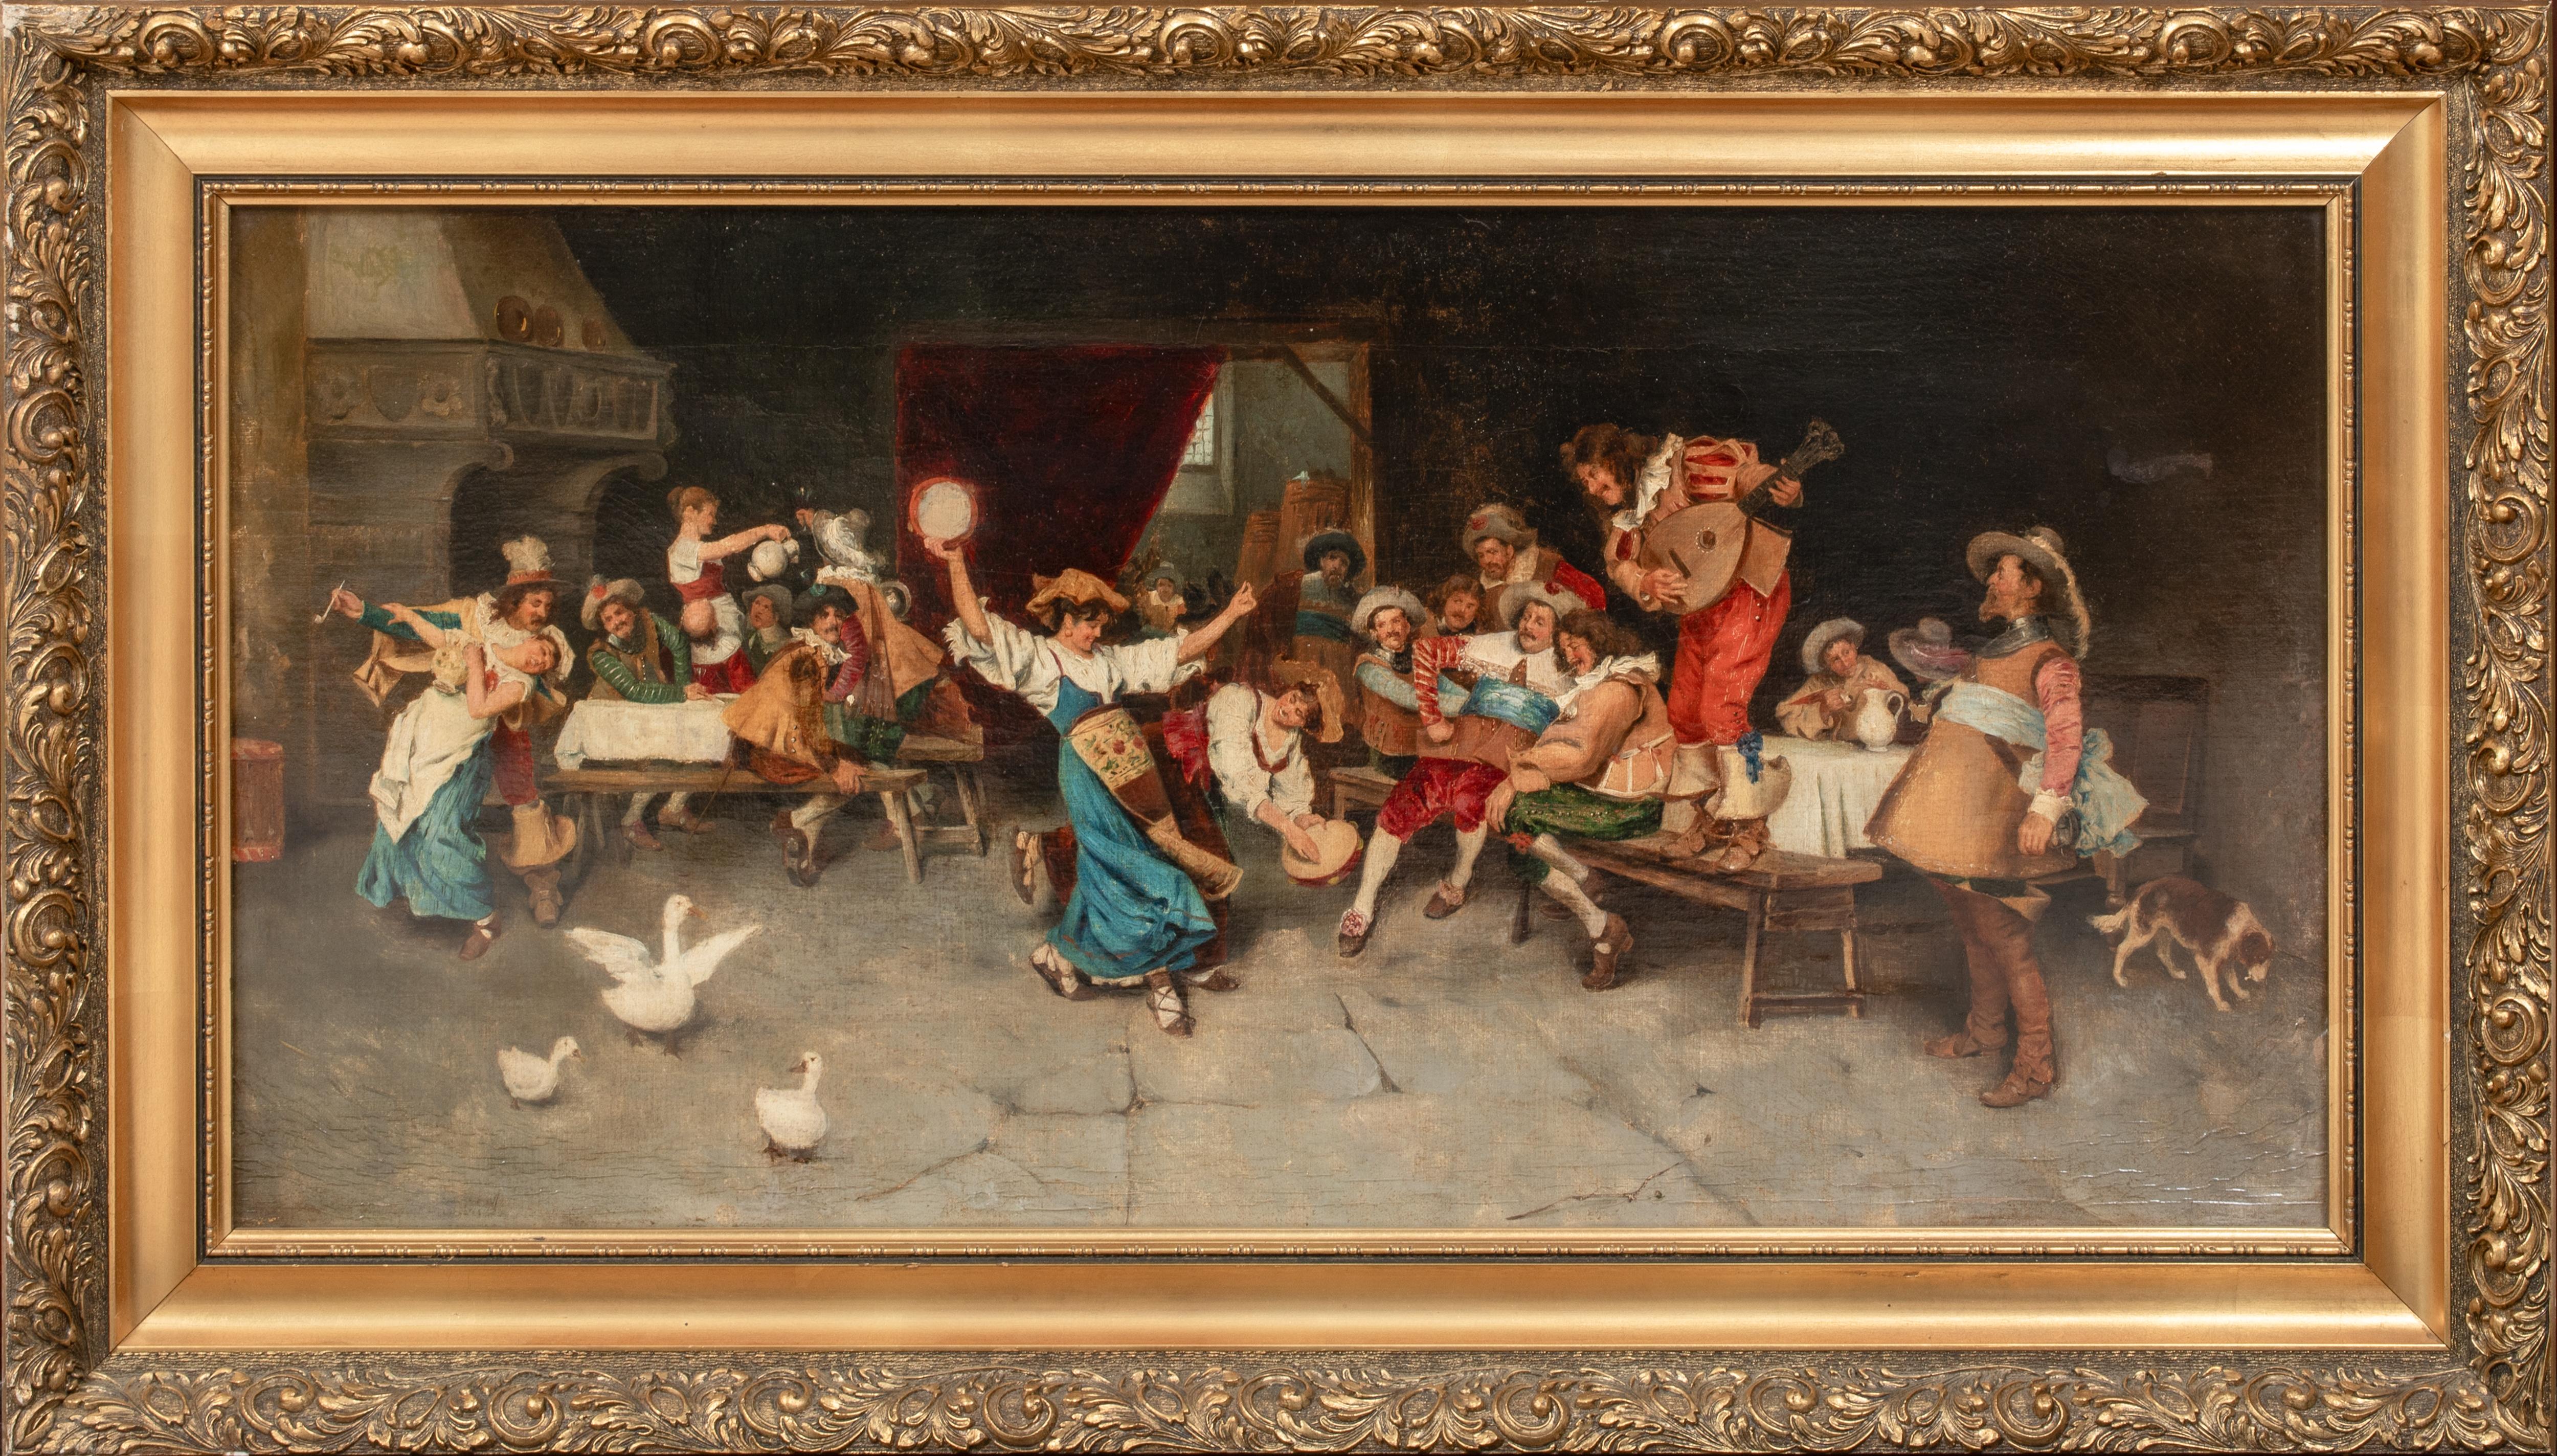 La Festa Da Ballo, 19th Century 

by Francesco VINEA (1845-1902) sales 

Large 19th Century Italian scene of a dancing party in a tavern, oil on canvas by Francisco Vines. Excellent quality and condition panorama of the celebration in a tavern hall